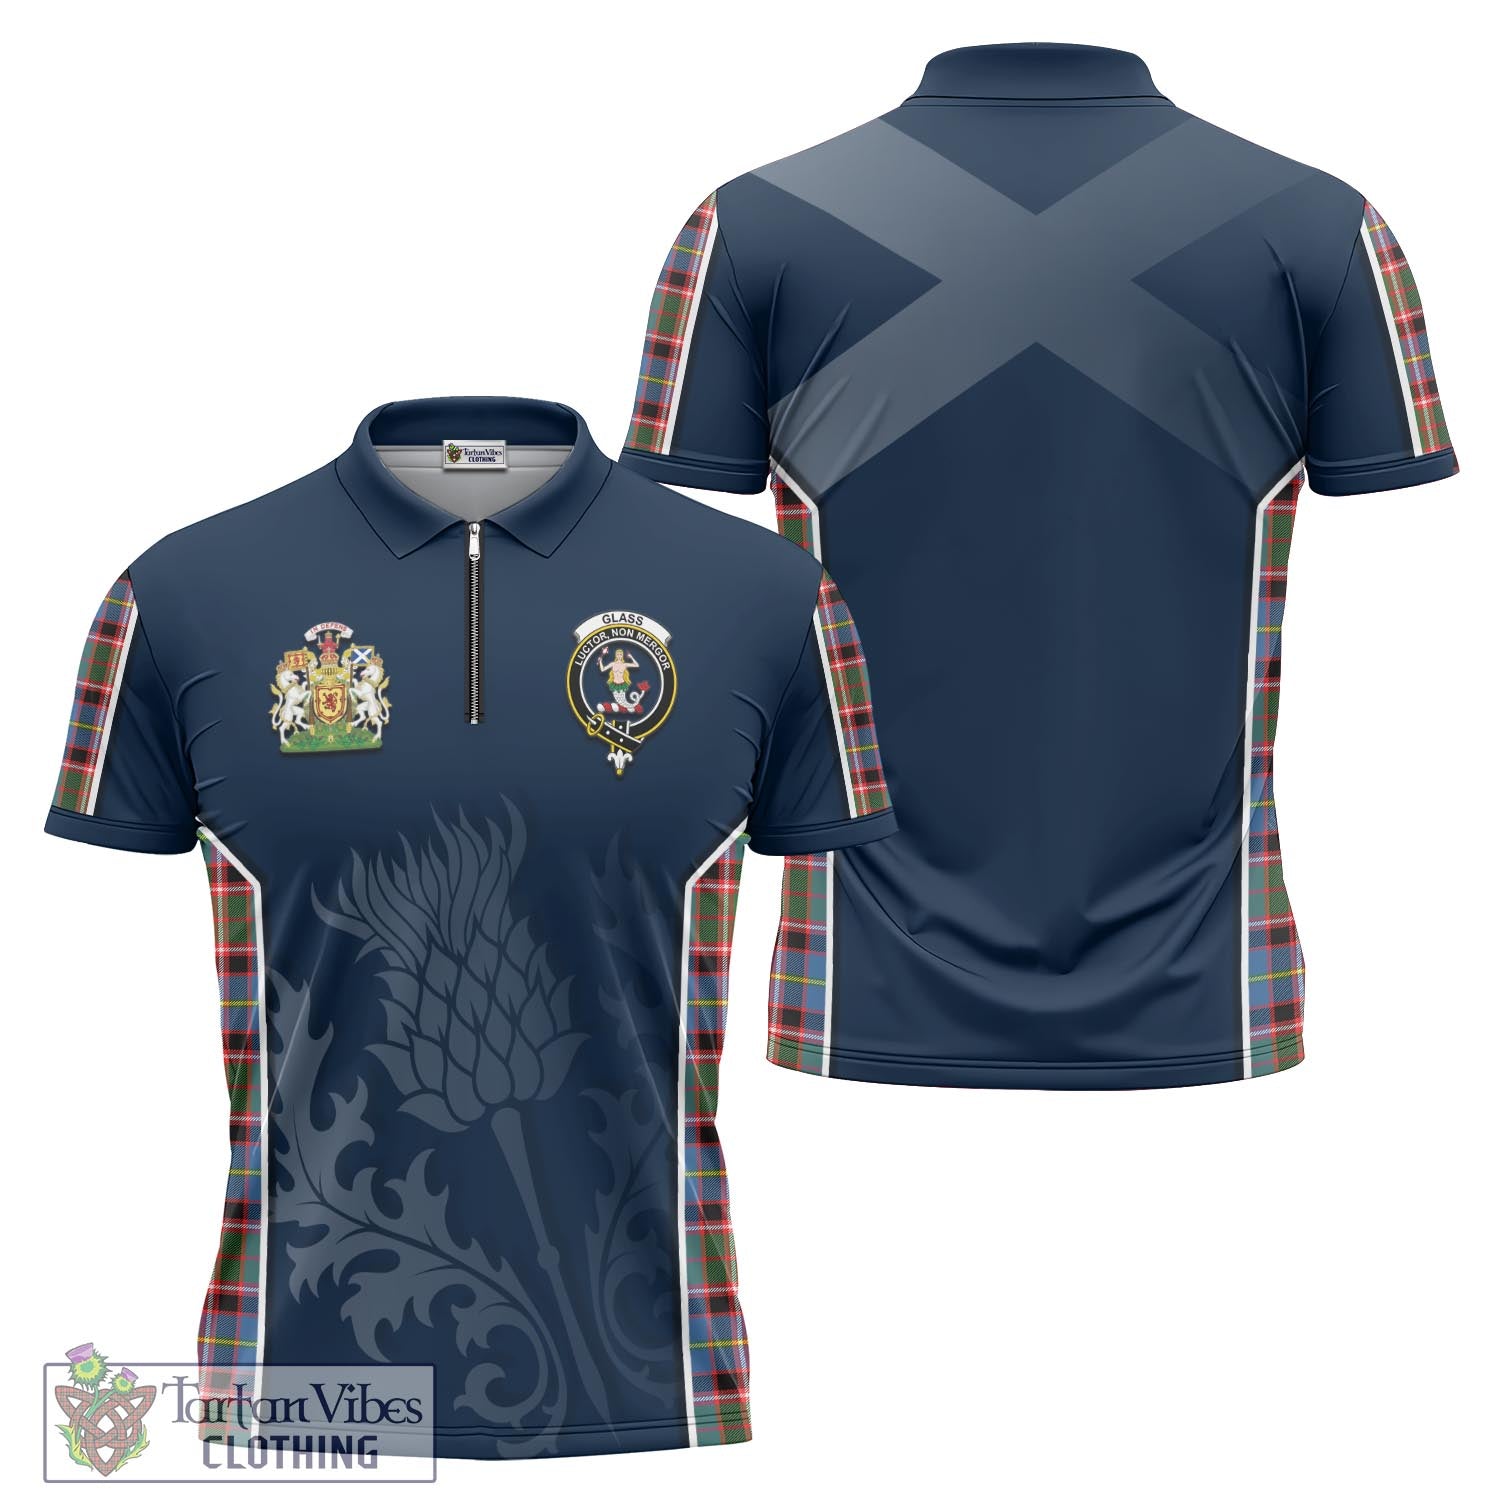 Tartan Vibes Clothing Glass Tartan Zipper Polo Shirt with Family Crest and Scottish Thistle Vibes Sport Style